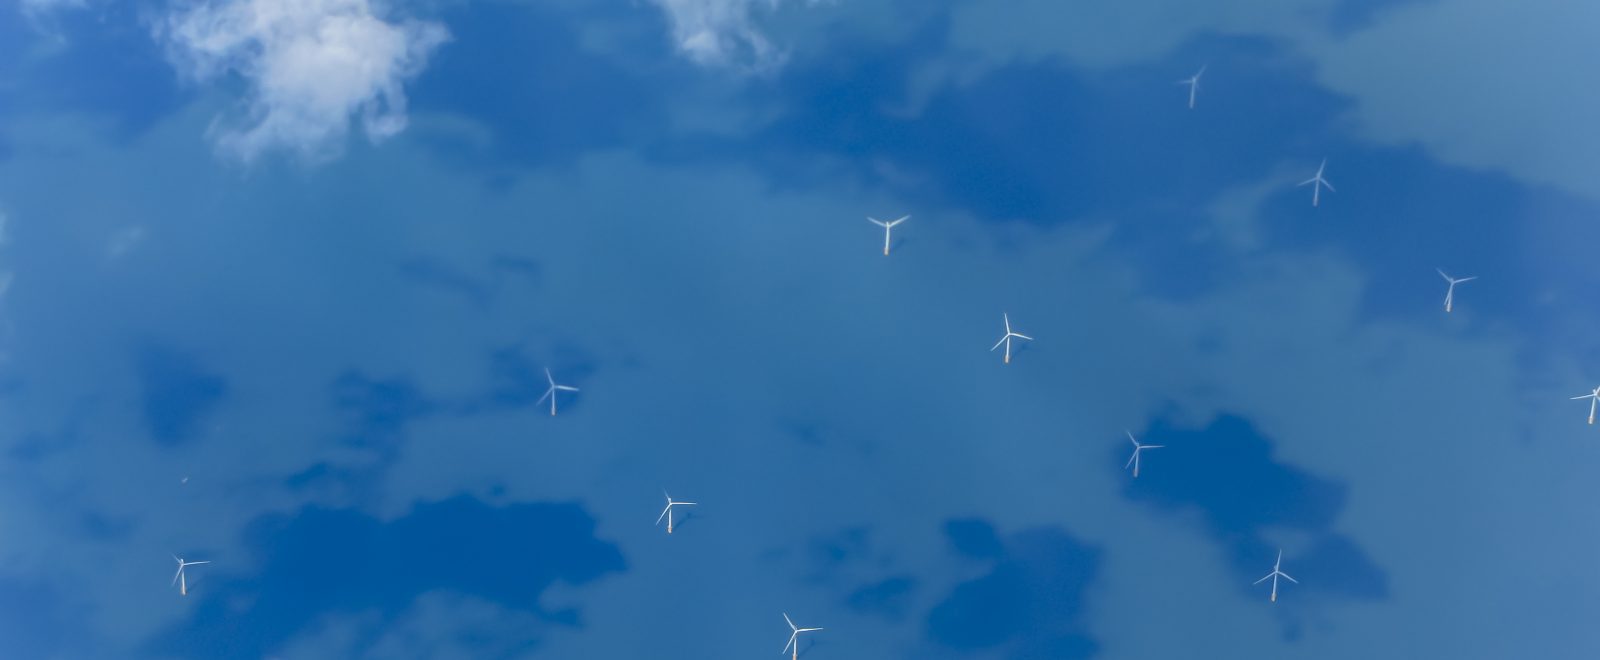 View of Wind Turbines Generating Electricity in English Channel from Aircraft